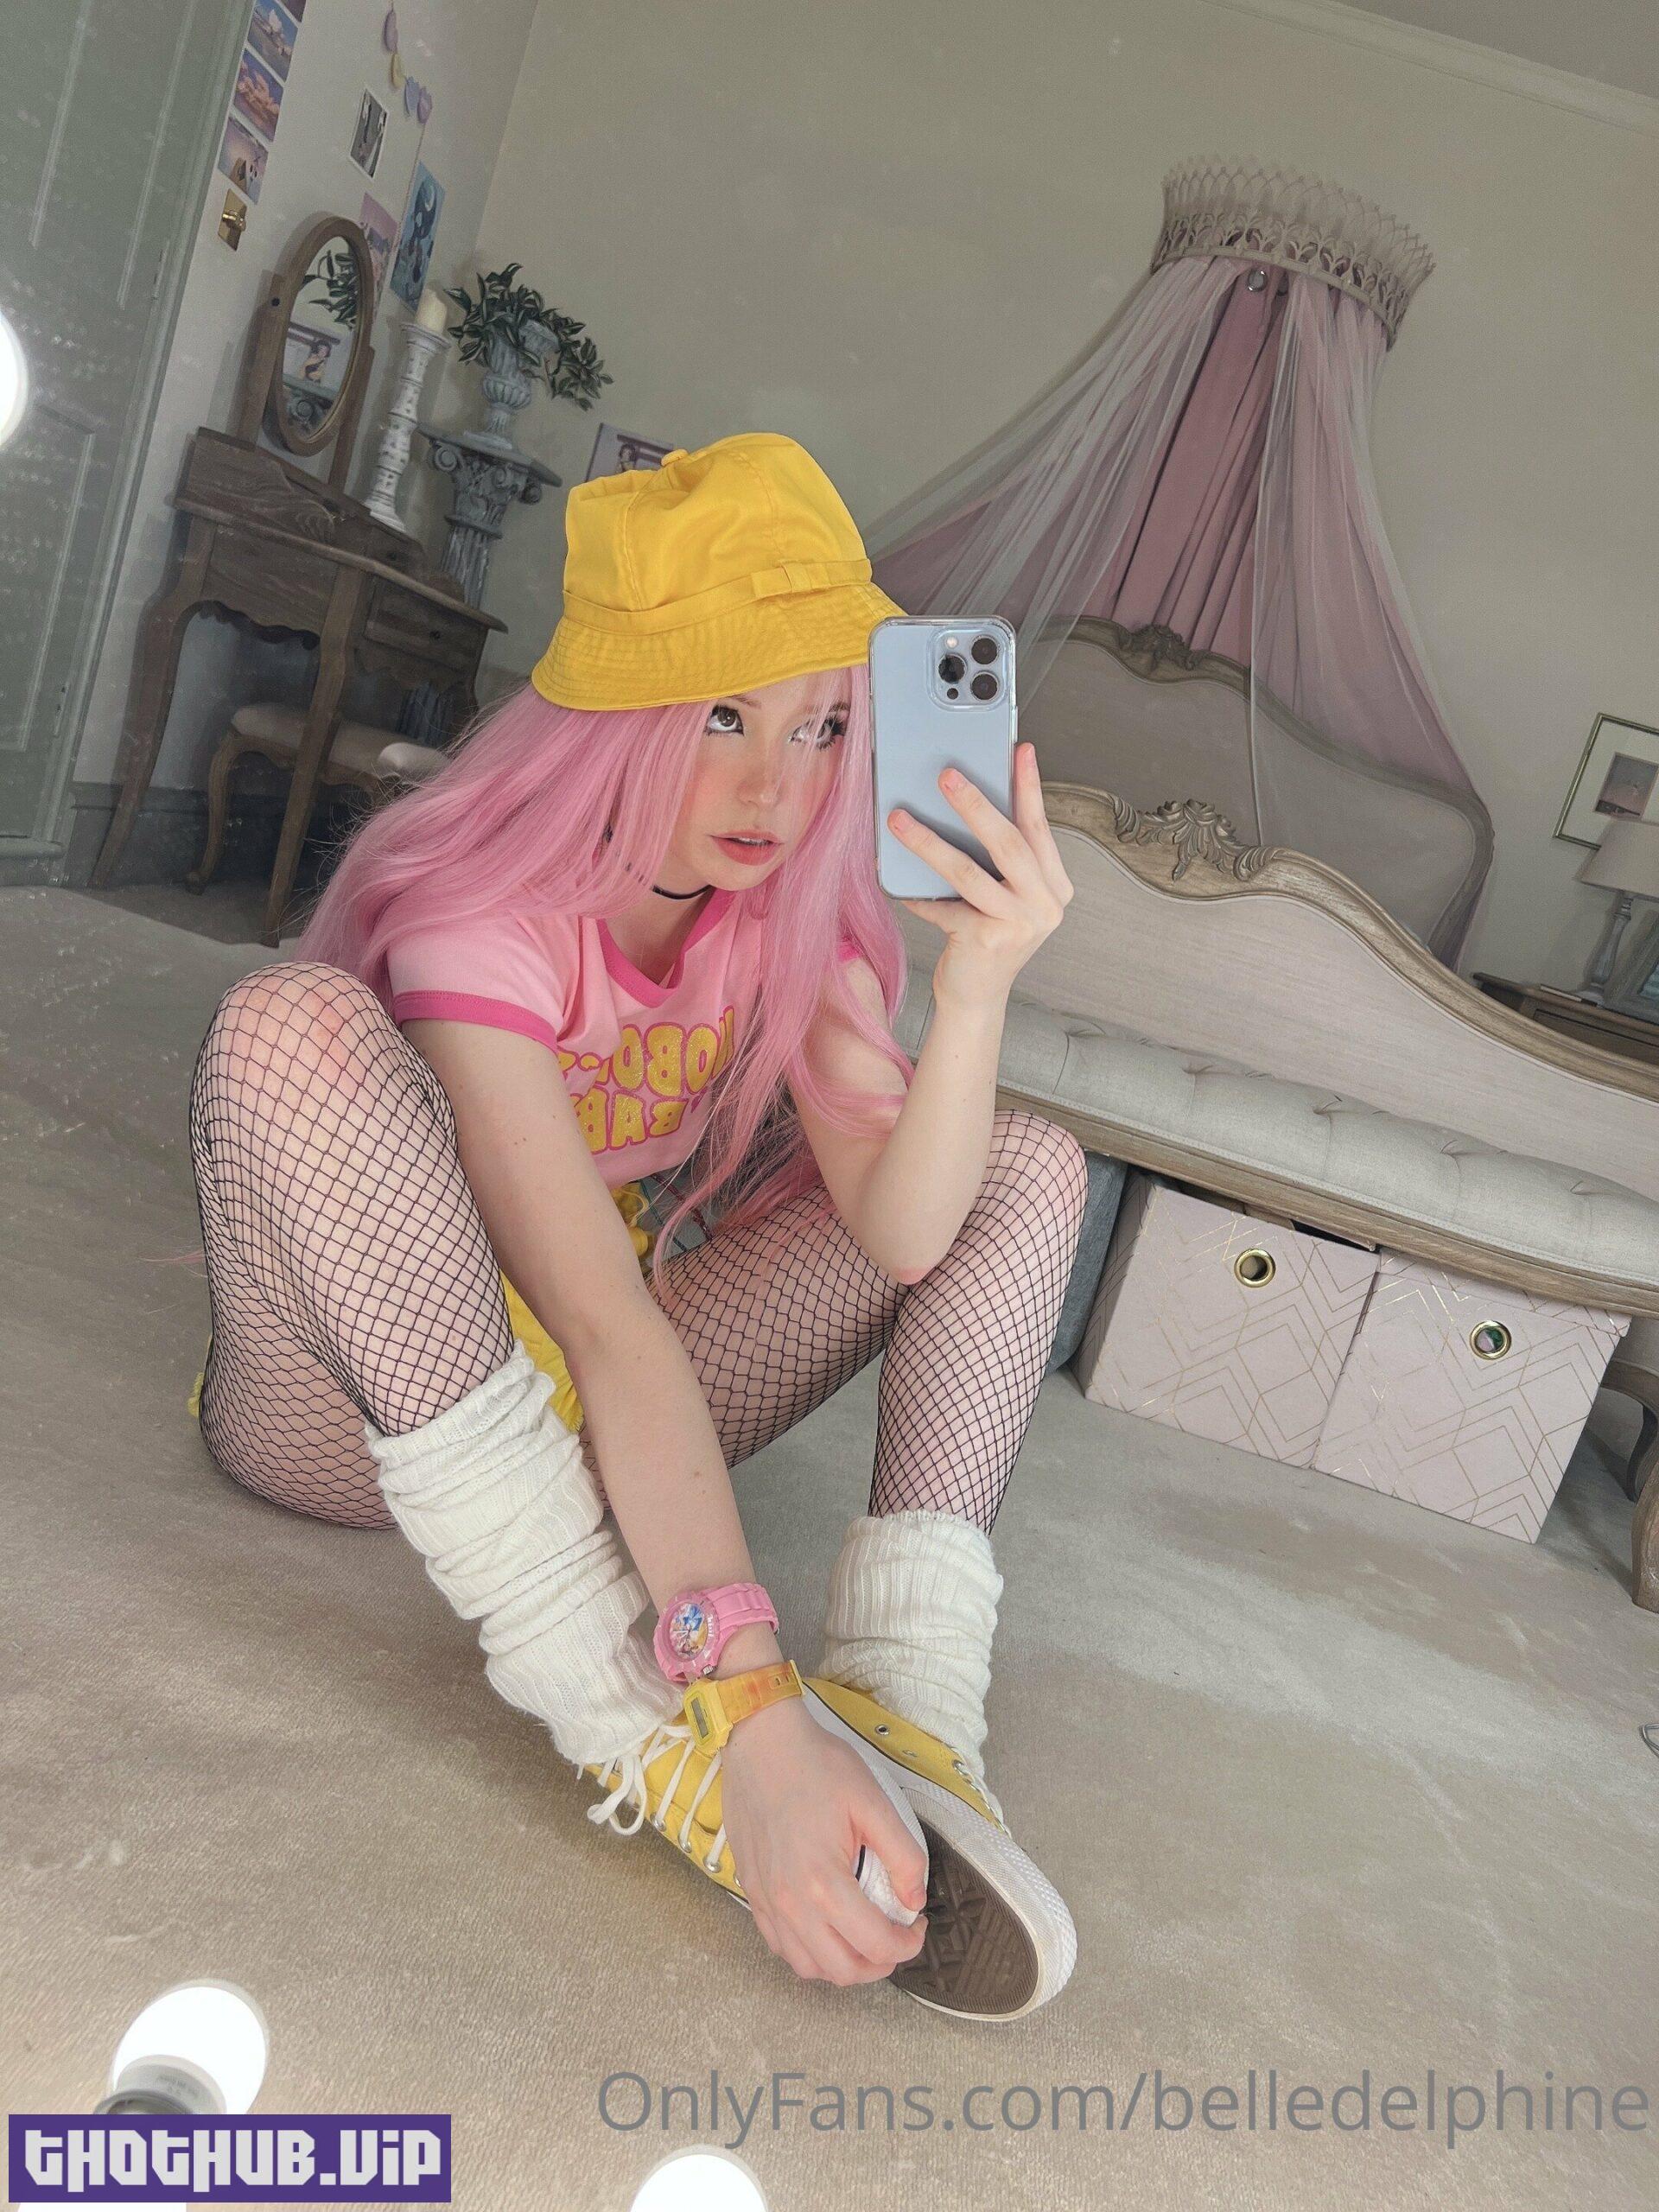 1667572854 941 Top Naked Belle Delphine Yellow Hat Nude NSFW Porn Leak